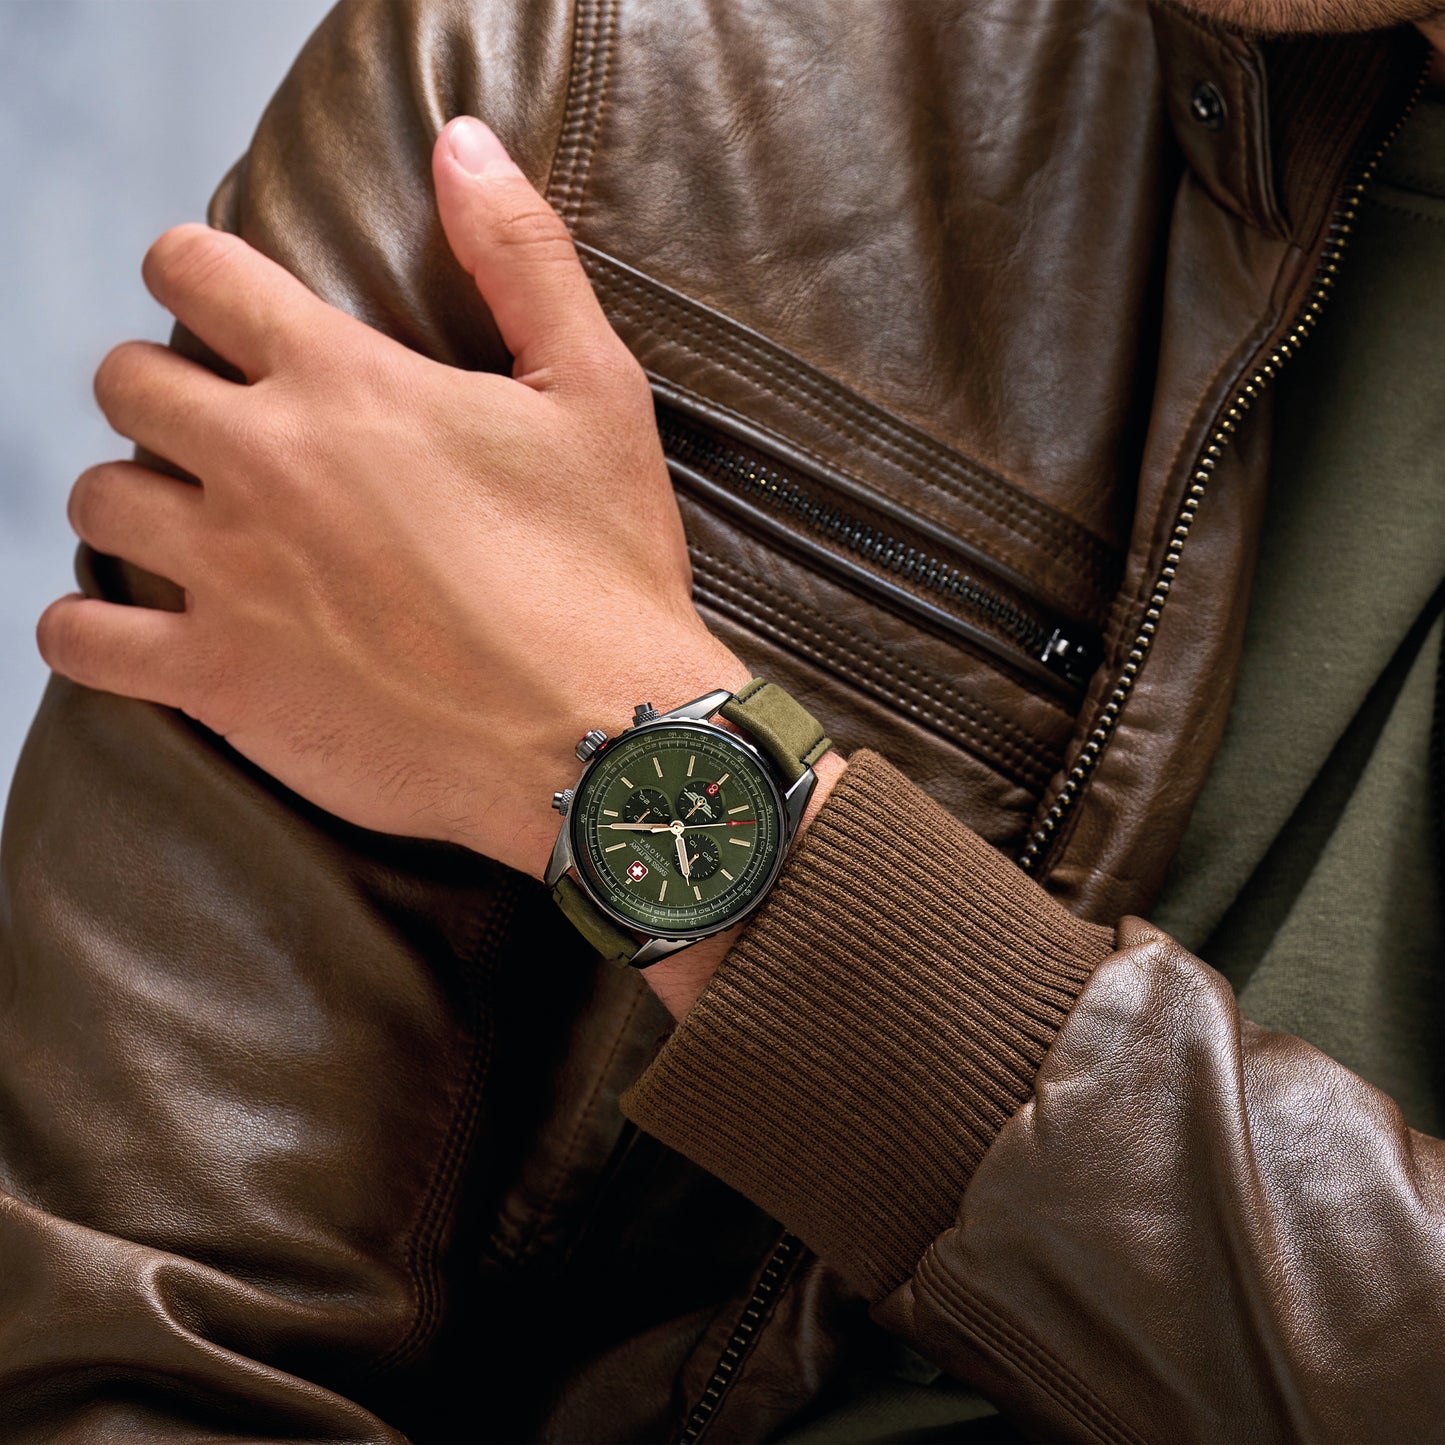 Swiss Military Hanowa Afterburn Chrono. Stainless steel case in gunmetal PDV plating, olive green dial and a genuine olive green Italian leather strap.